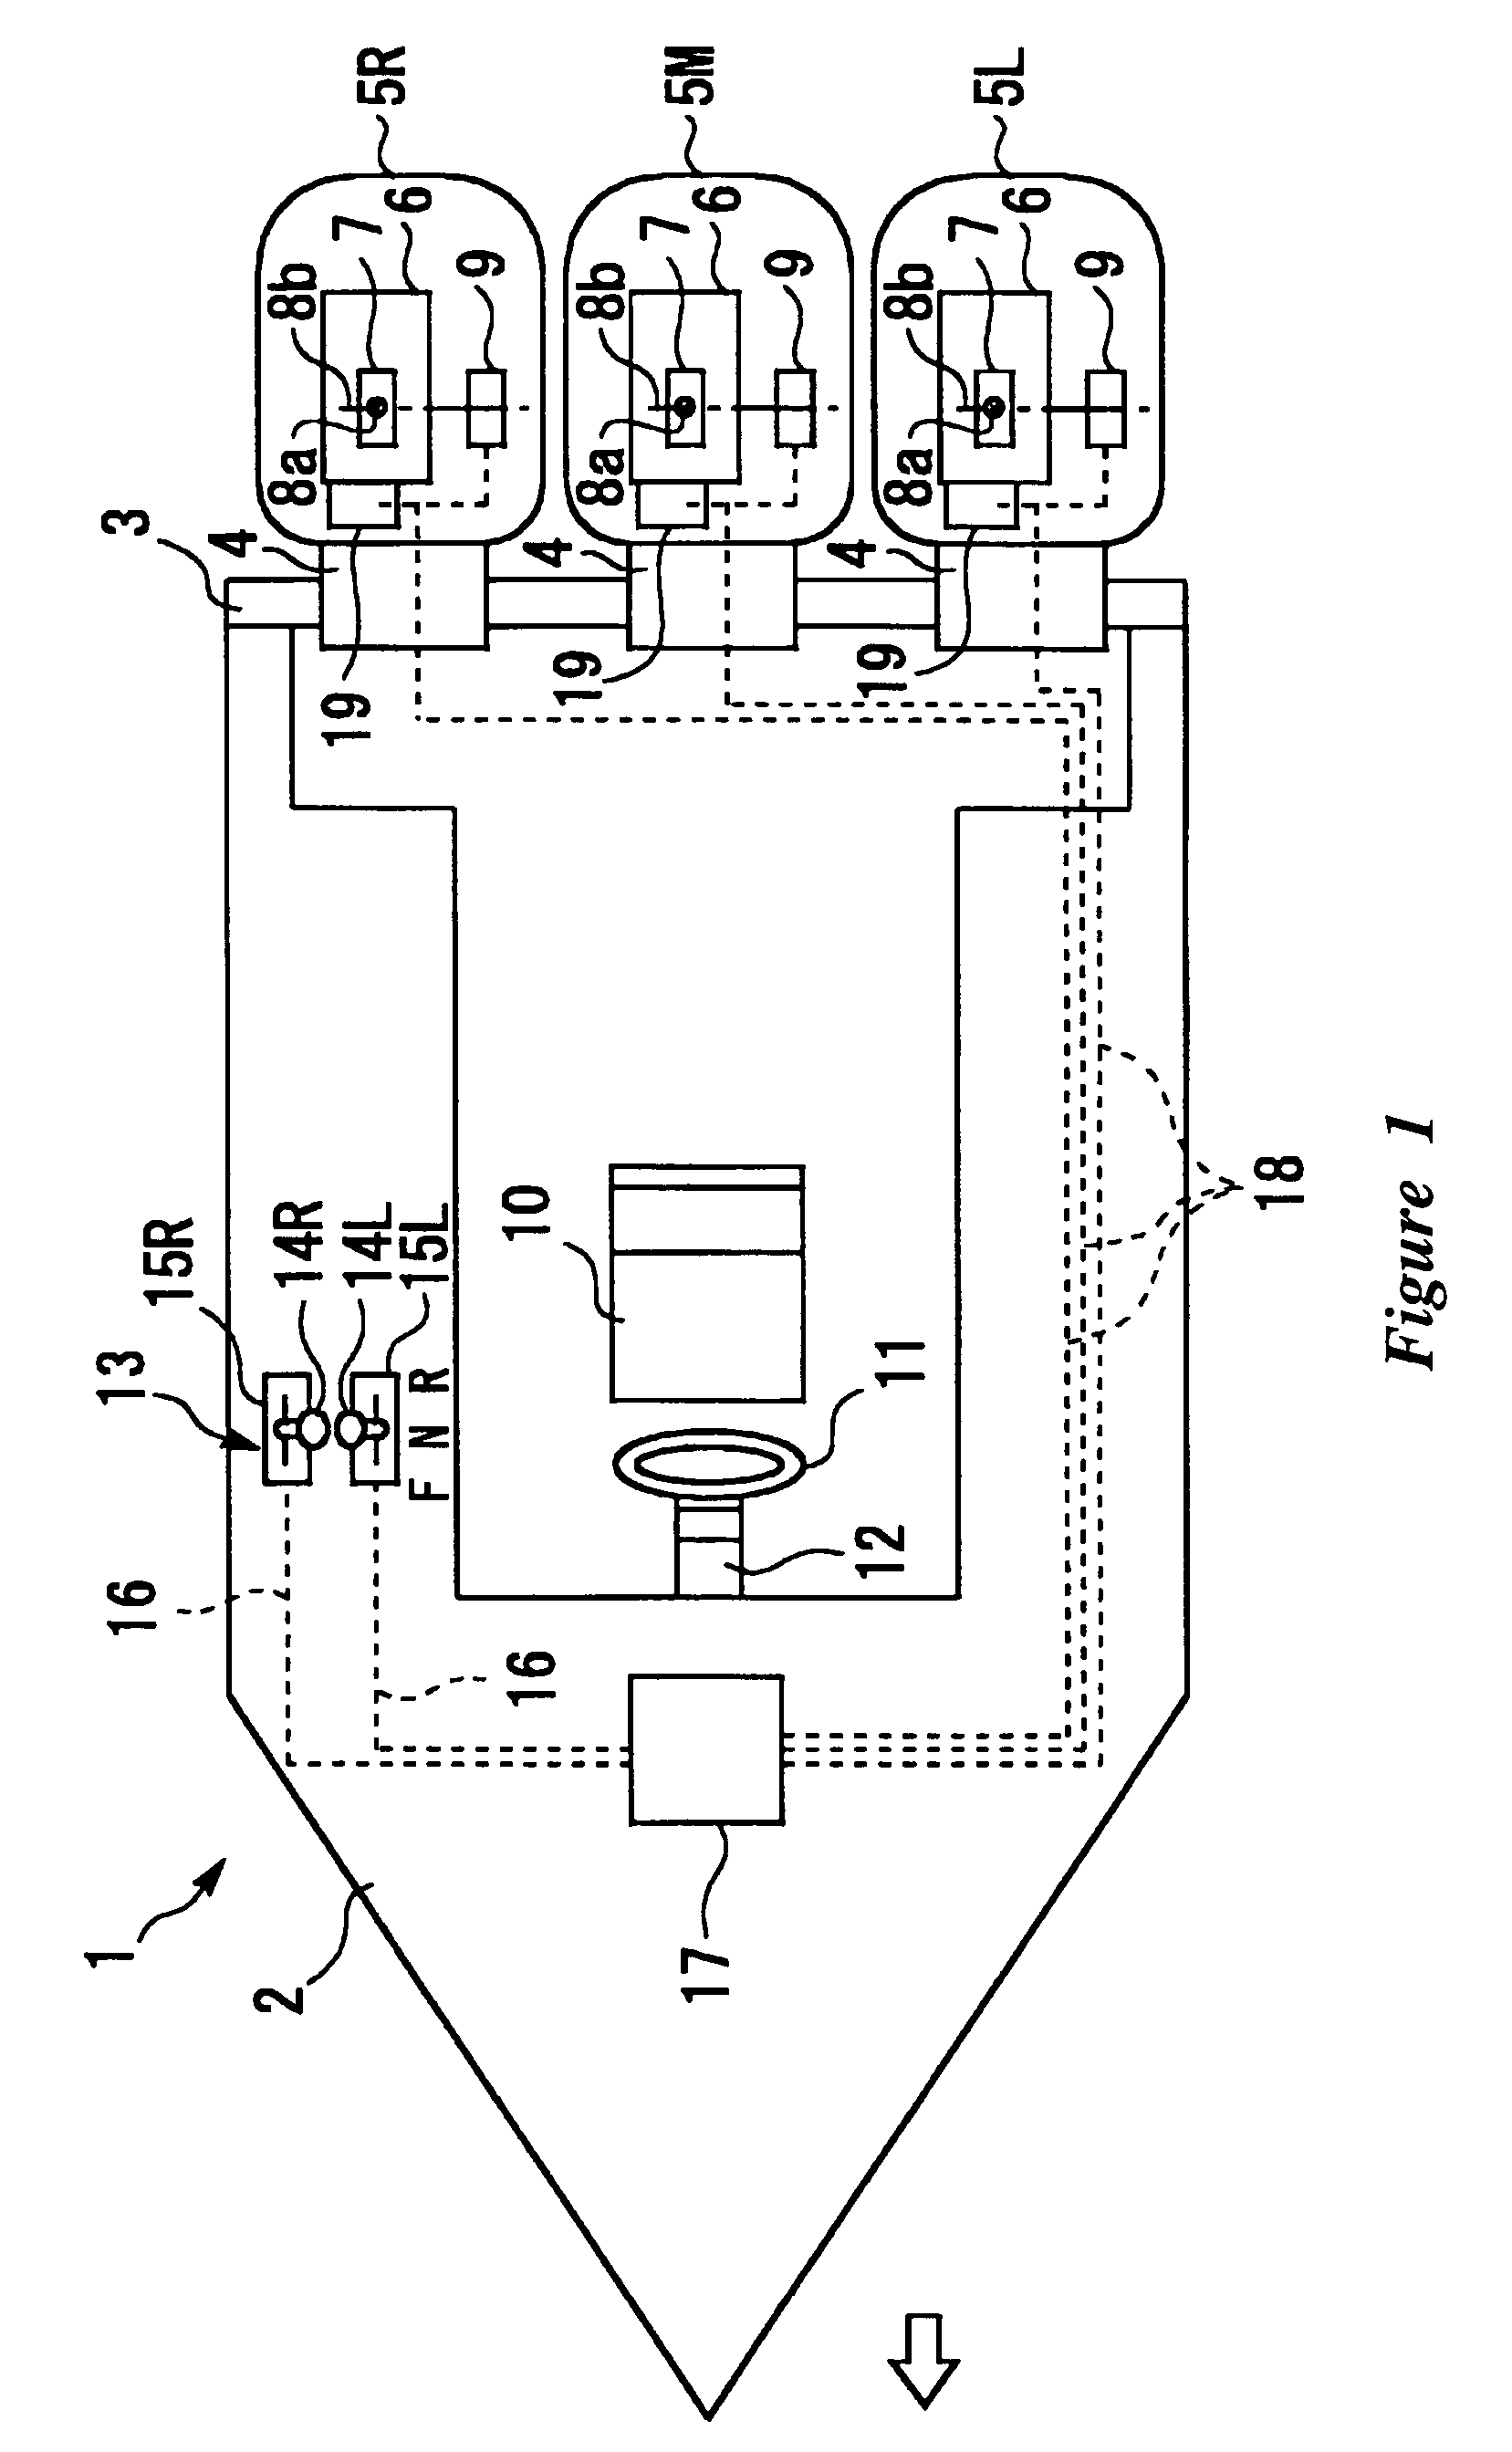 Control device for outboard motors